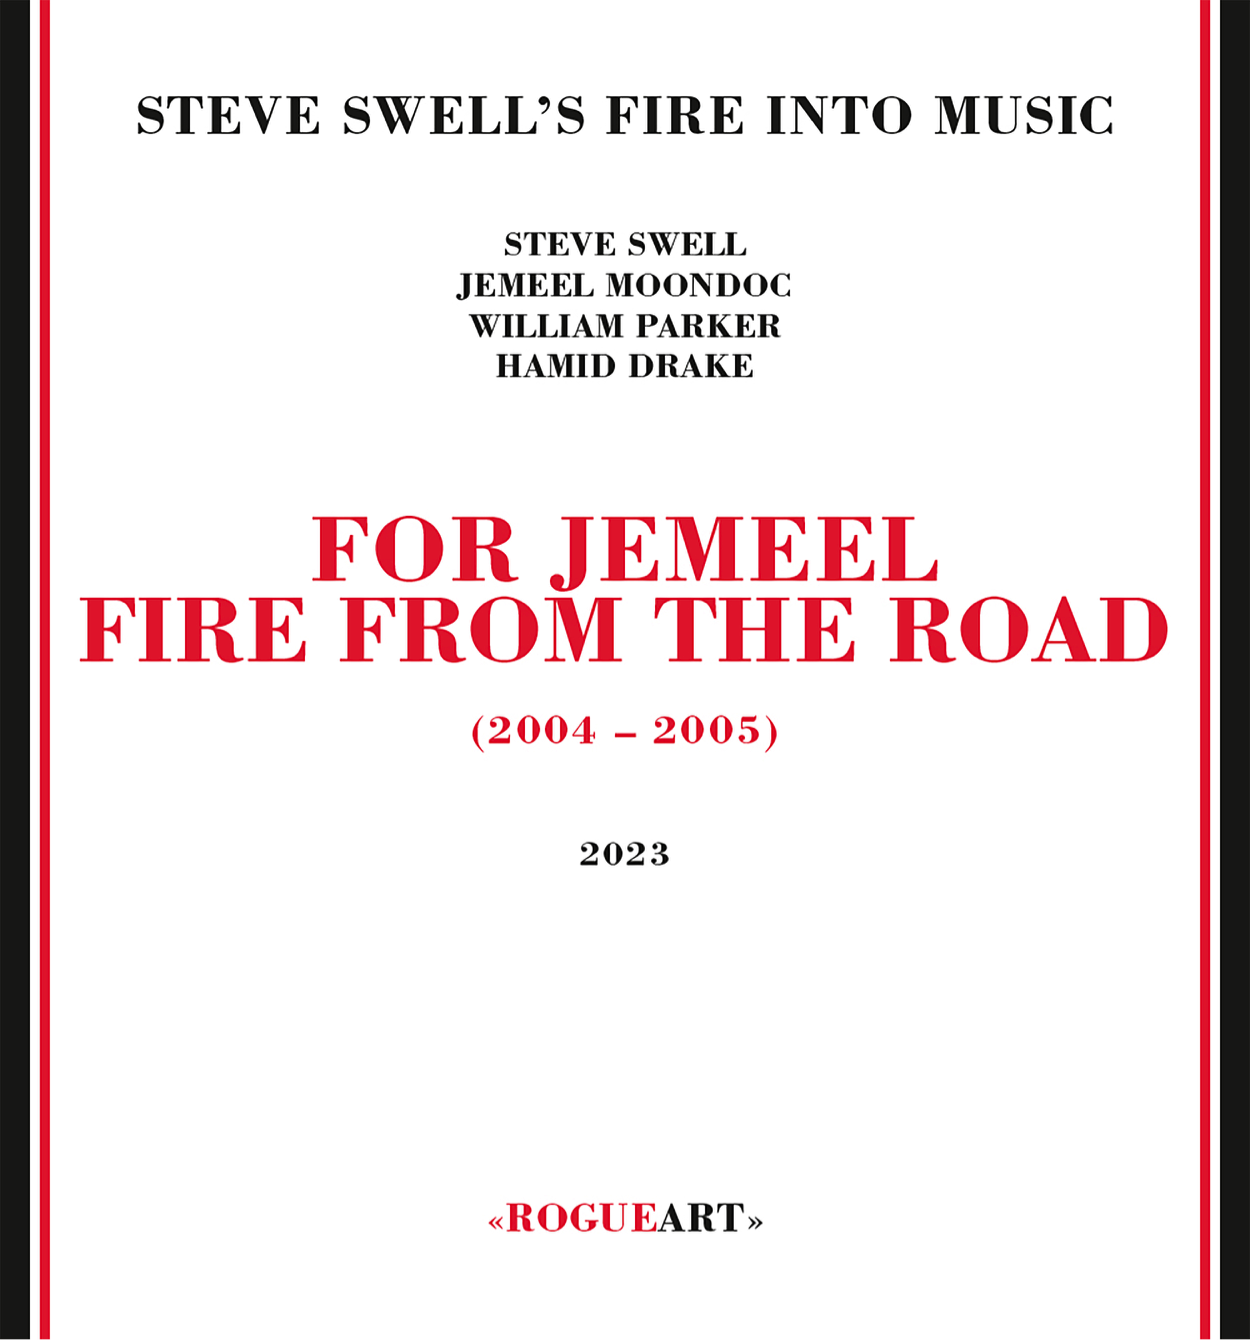 FOR JEMEEL - FIRE FROM THE ROAD